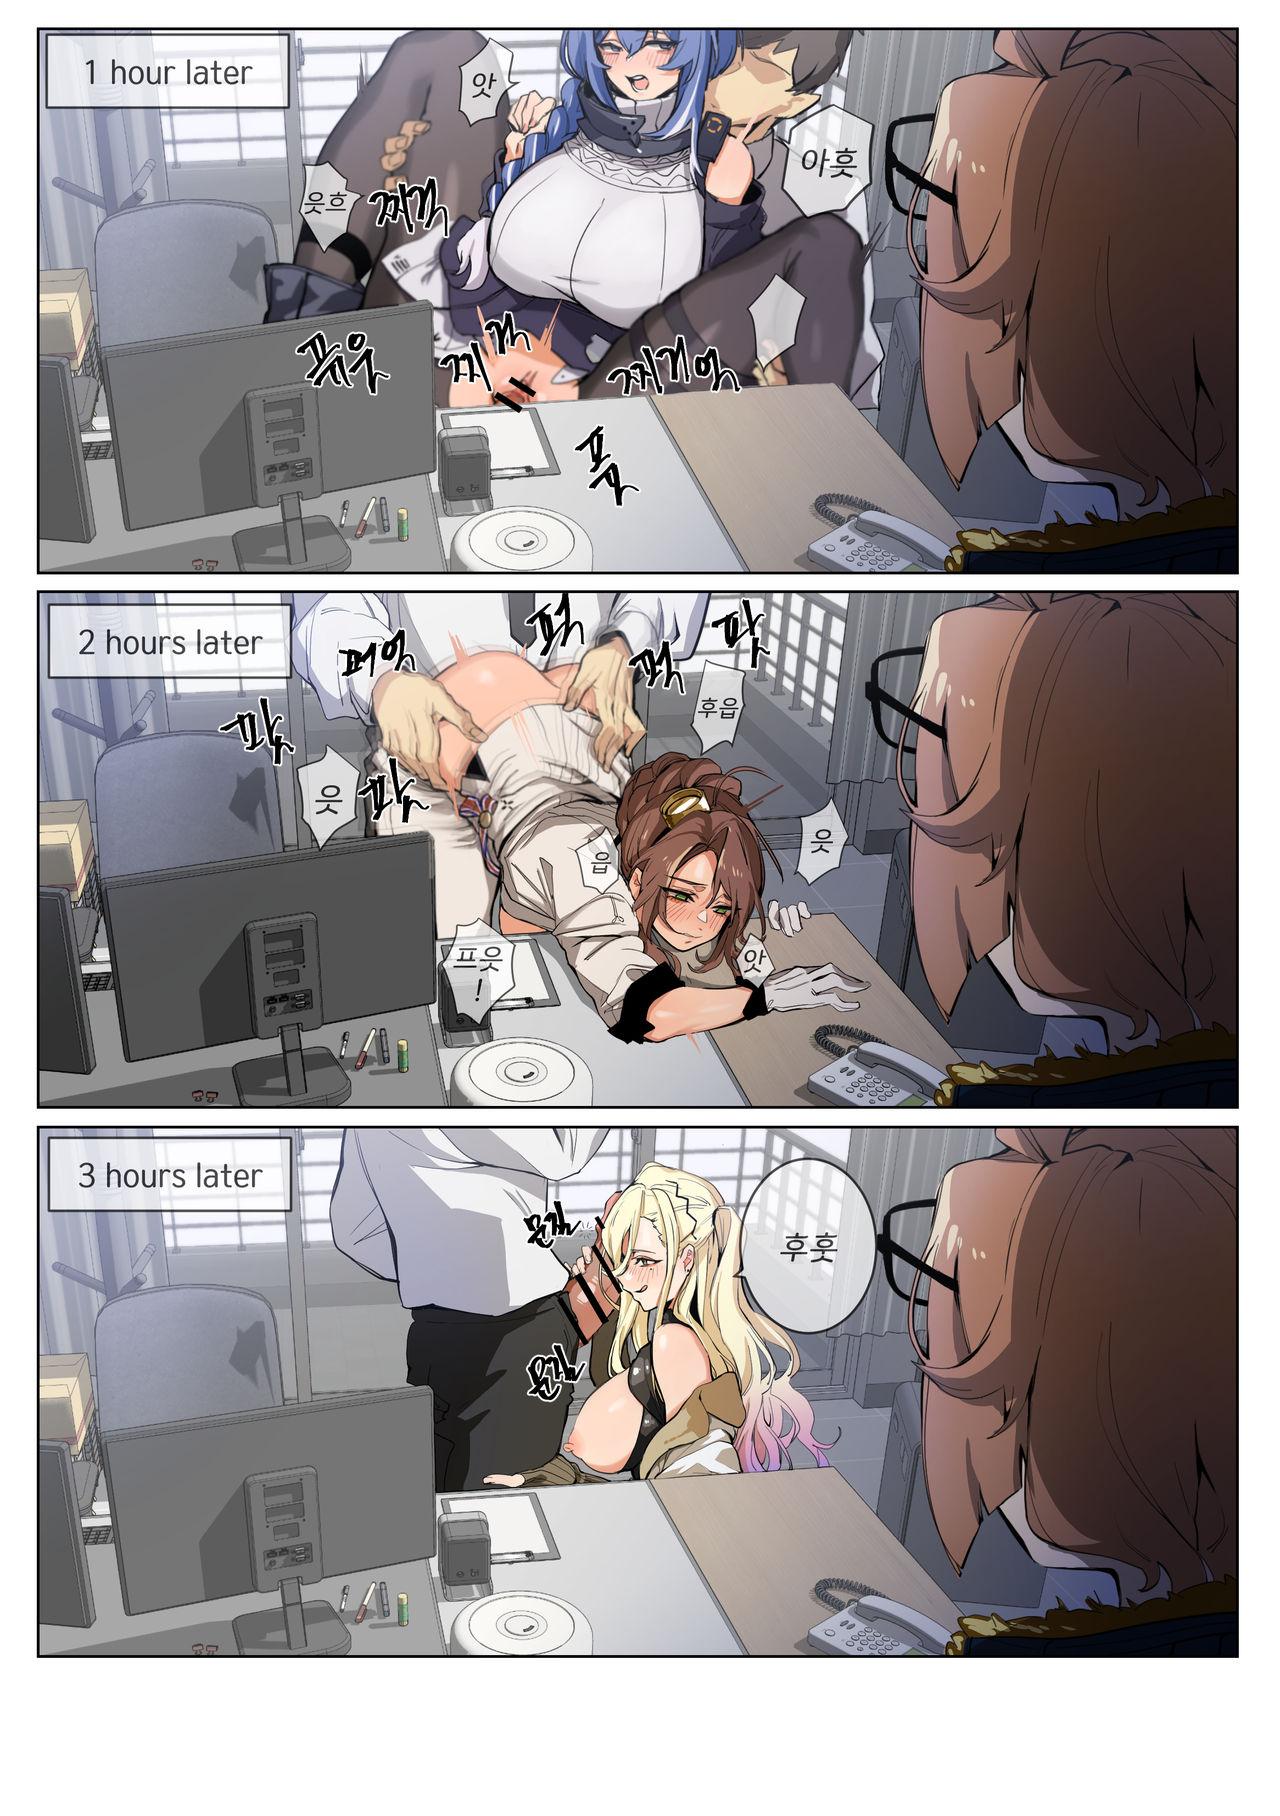 Cousin Grizzly - Girls frontline Sextoy - Page 4